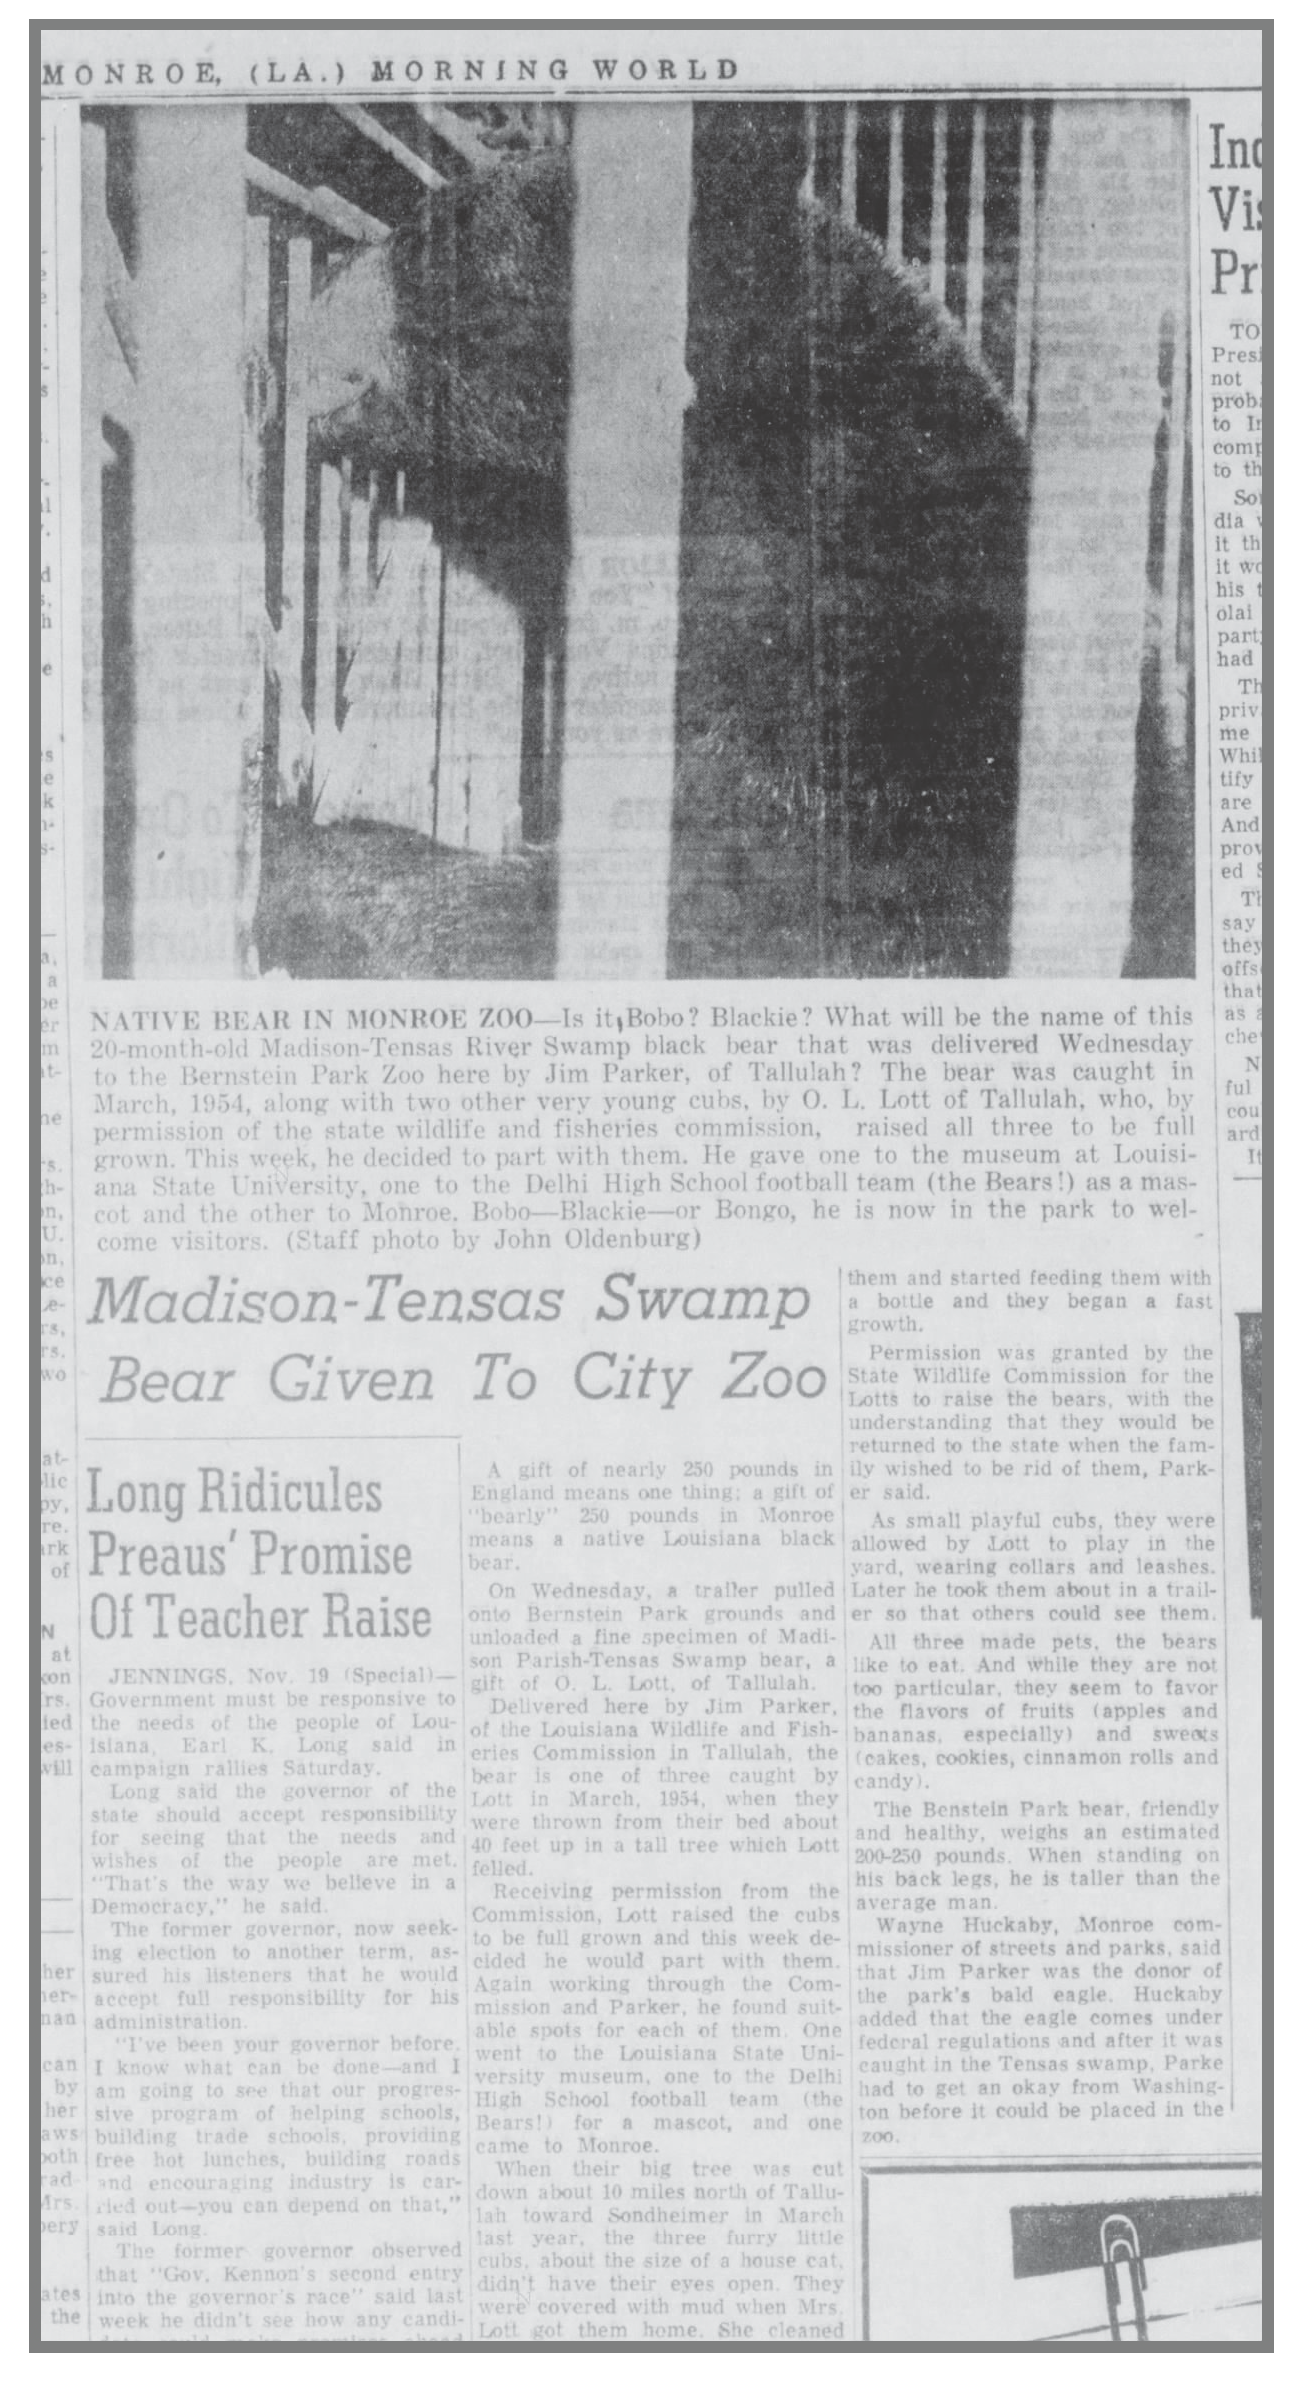 A scan from the Monroe Morning World Sun November 20, 1955 issue. In it is an image of a black bear with text underneath. The headline reads, "Madison-Tensas Swamp Bear Given To City Zoo."